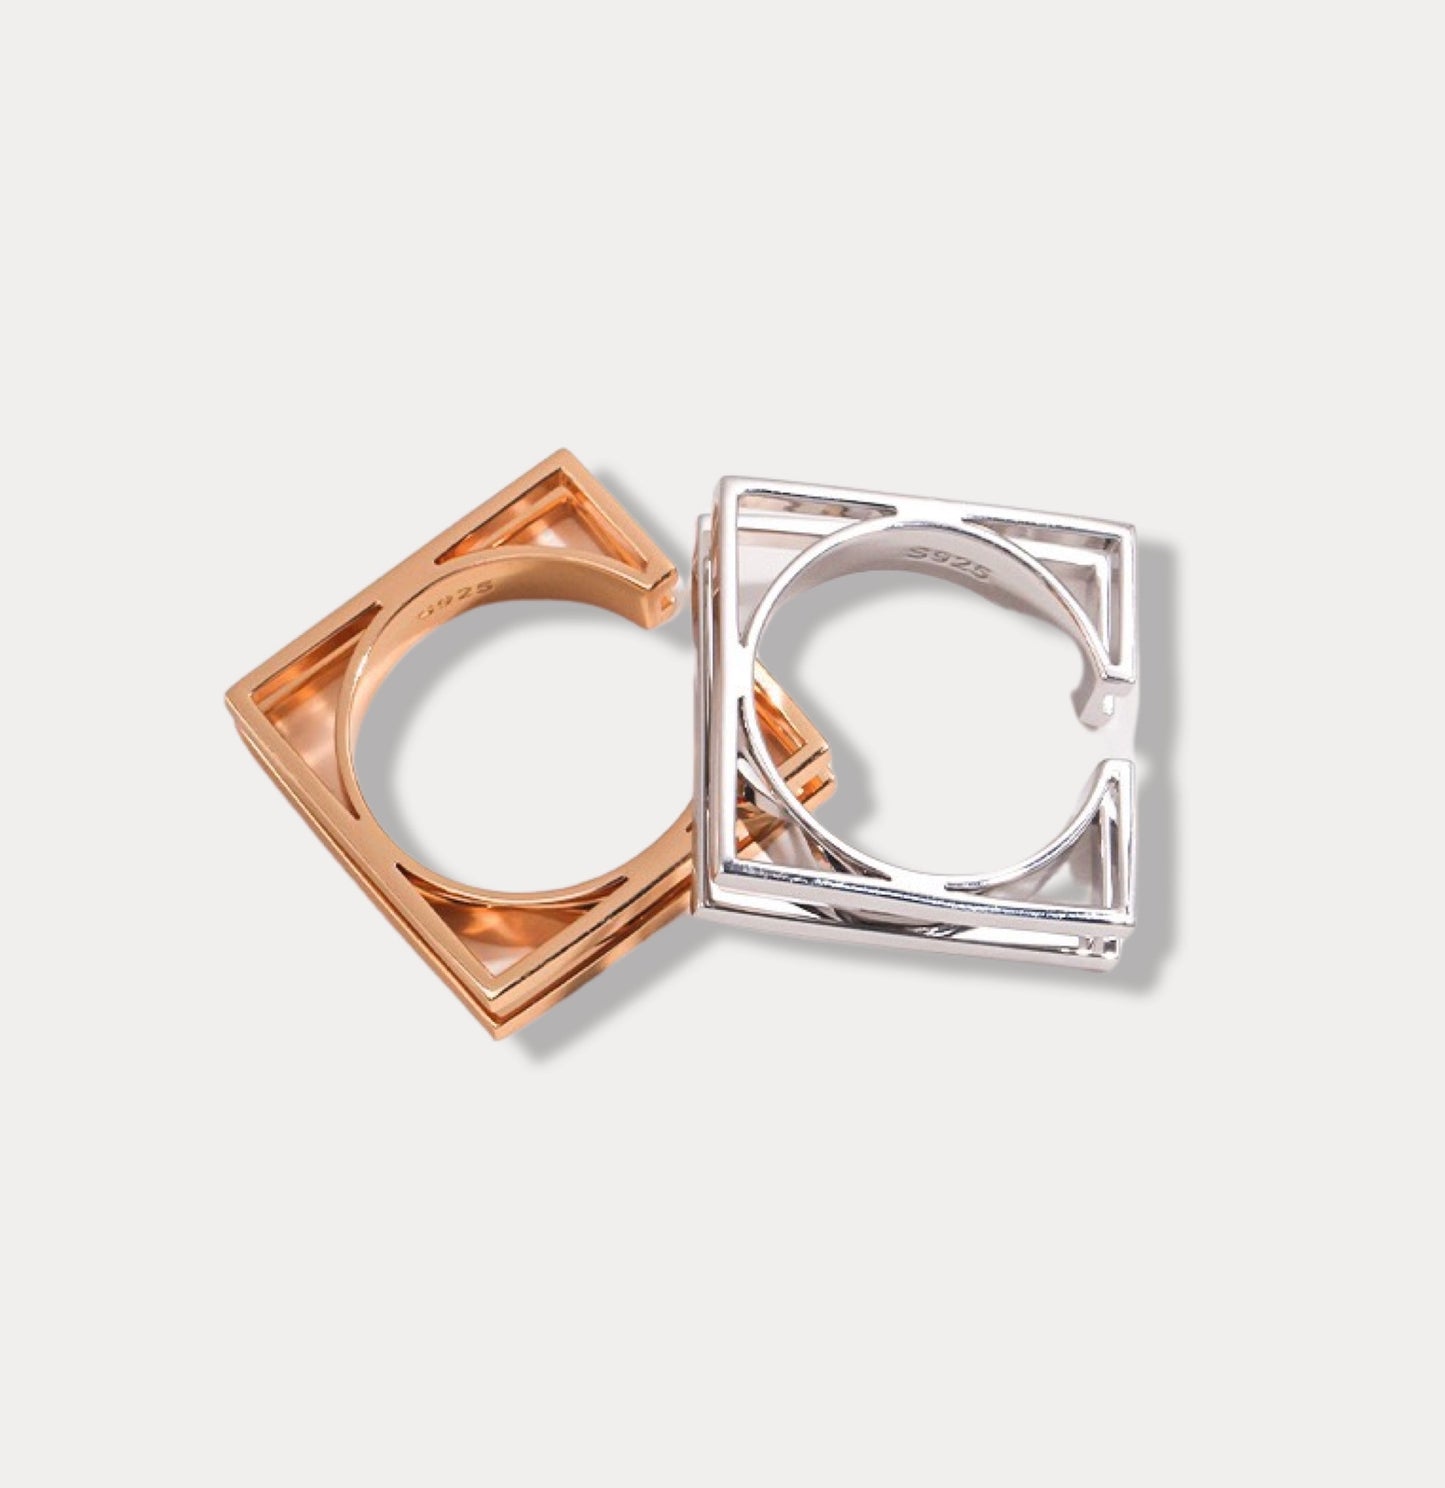 Symmetric Harmony Squared Elegance: Circle of Gold and Silver Adjustable Rings -  the perfect blend of classic and contemporary designs